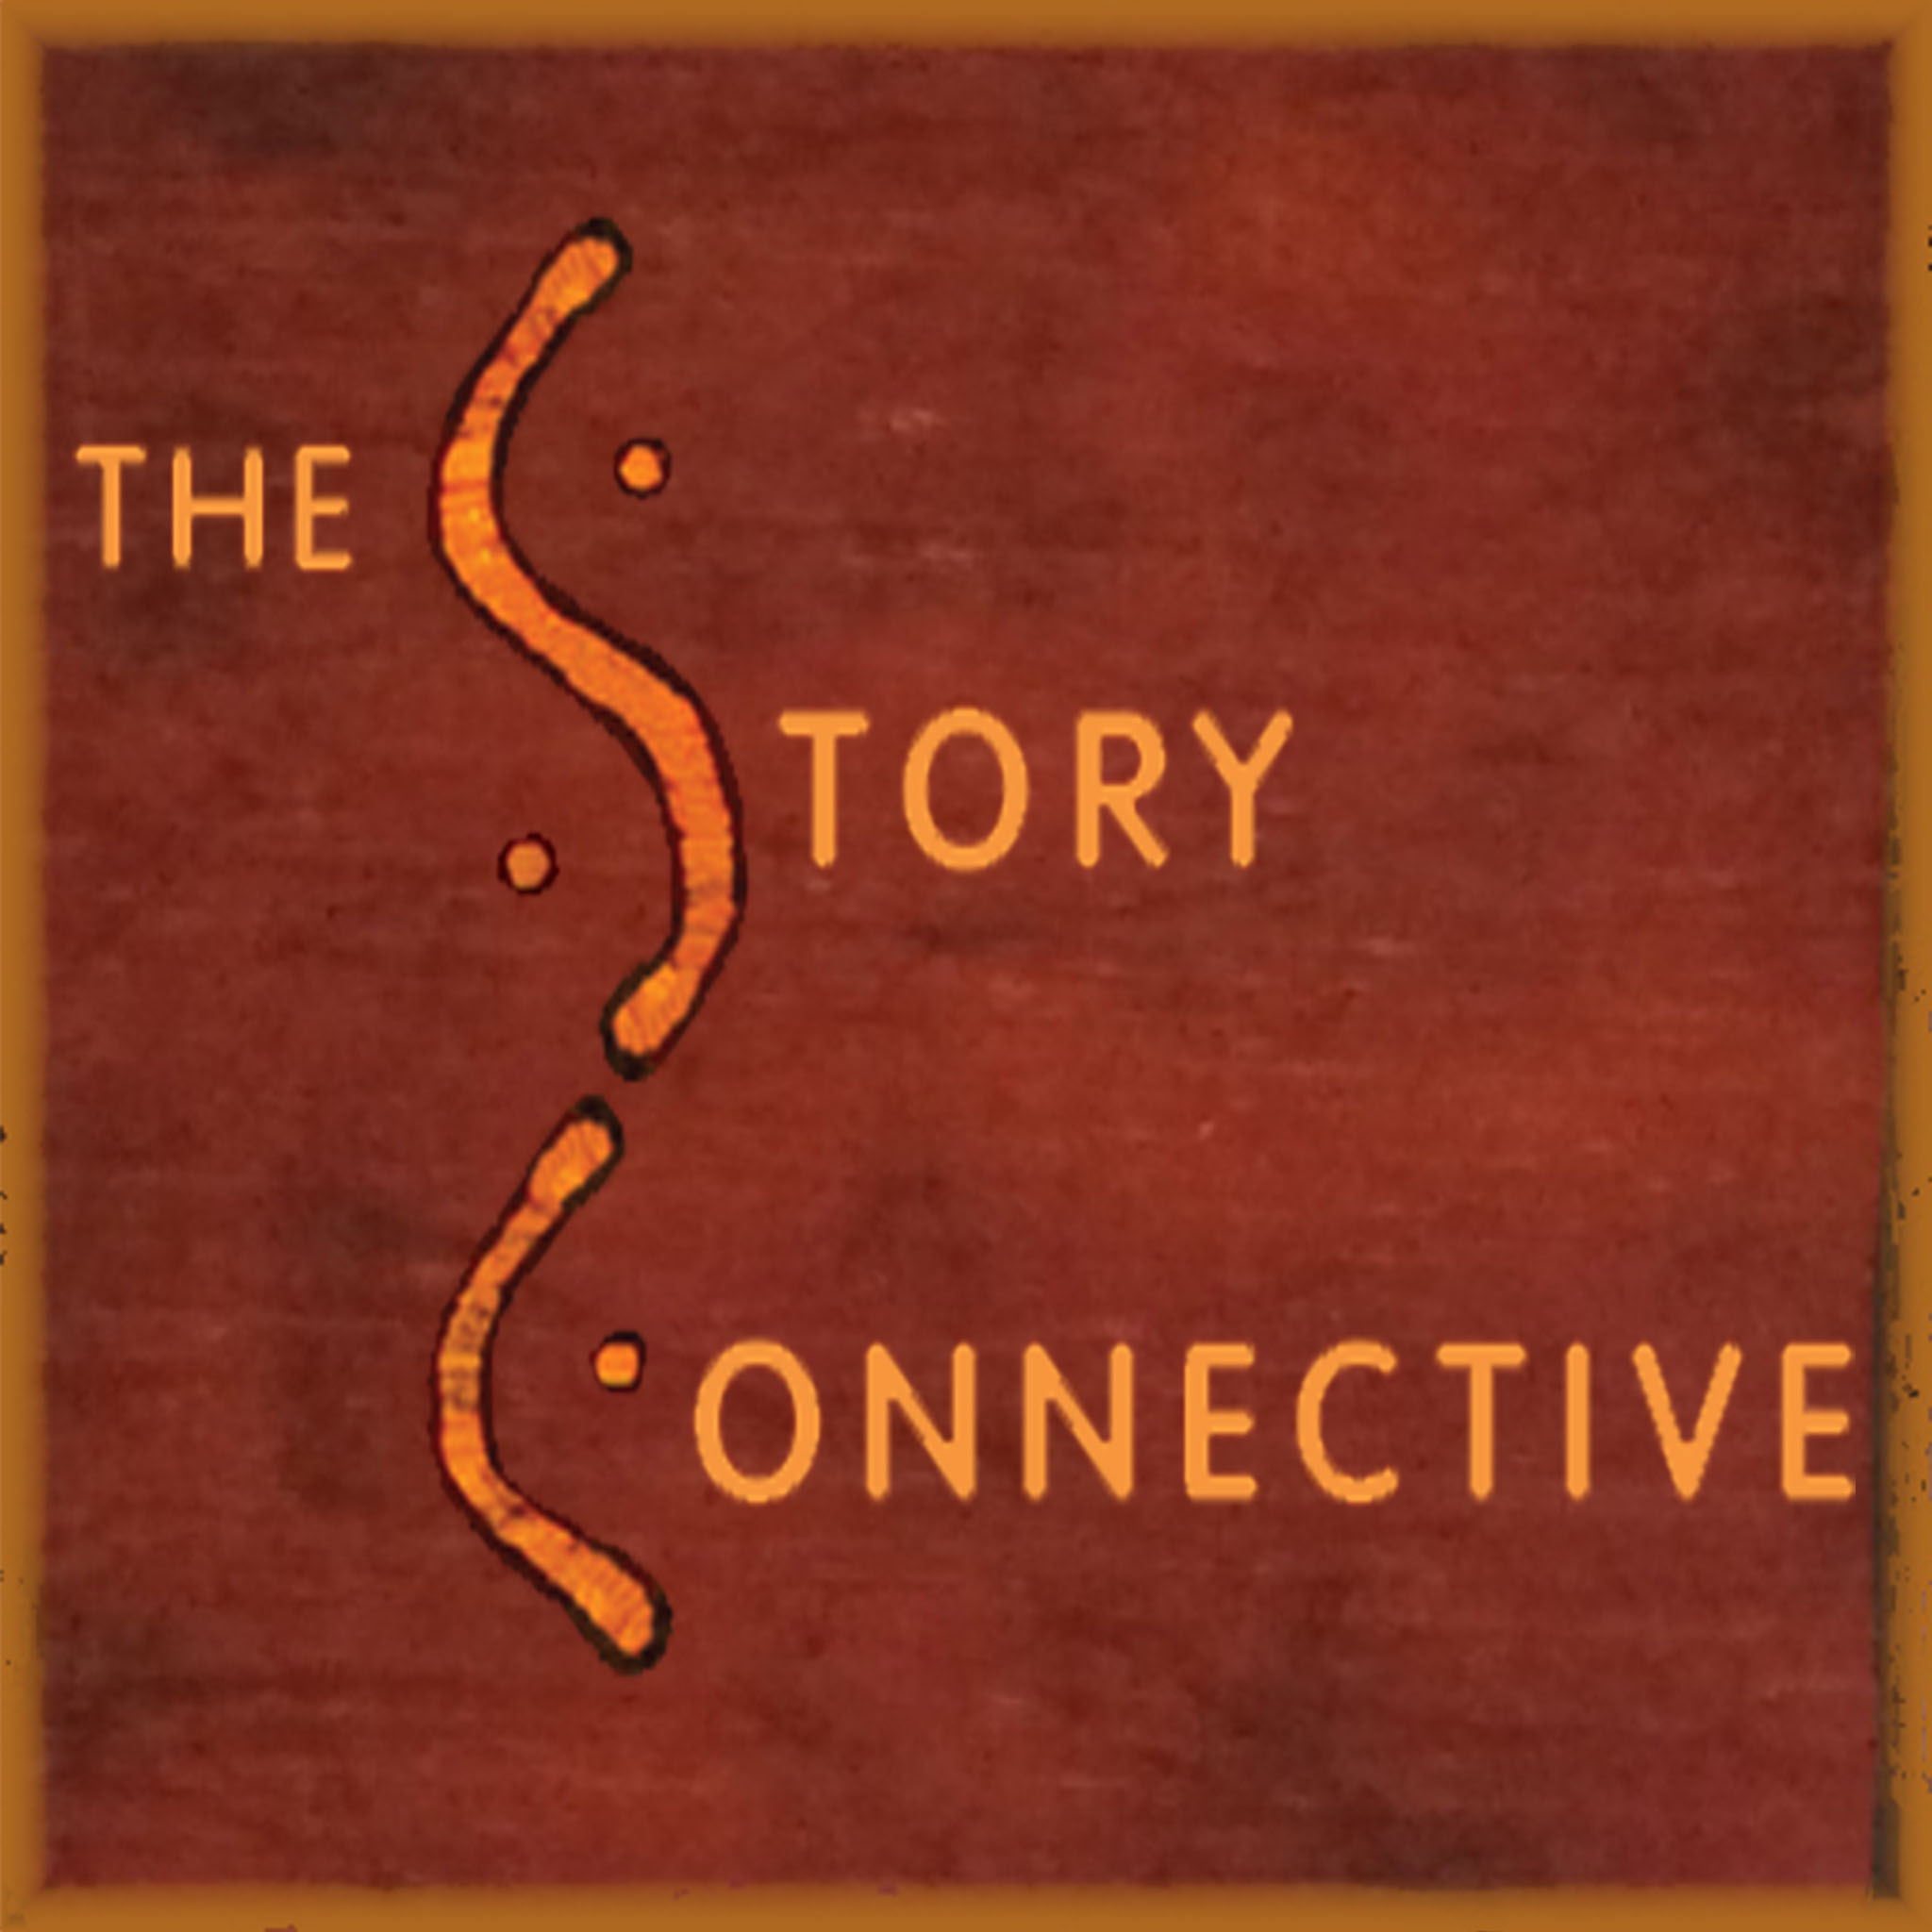 What is Story Connective?